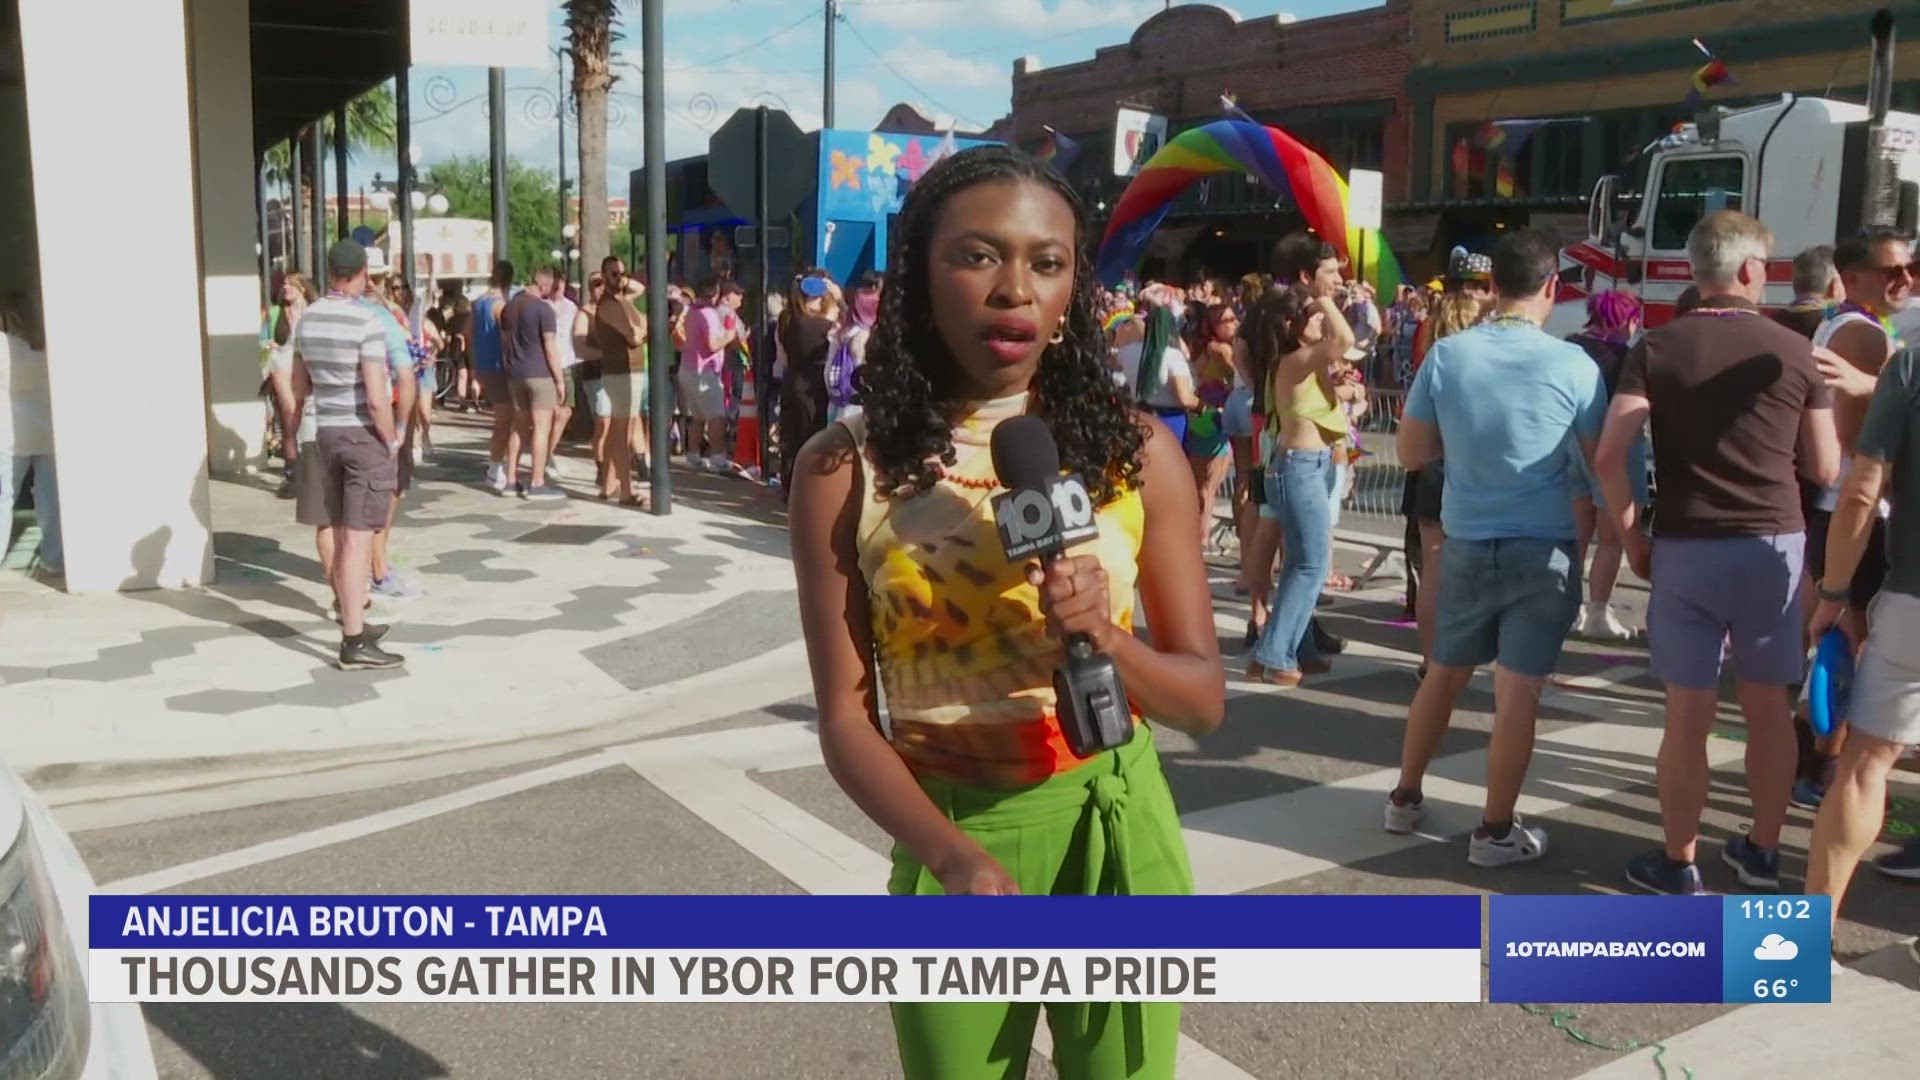 Thousands of people took to the streets of Ybor City to celebrate at the Tampa Pride parade.